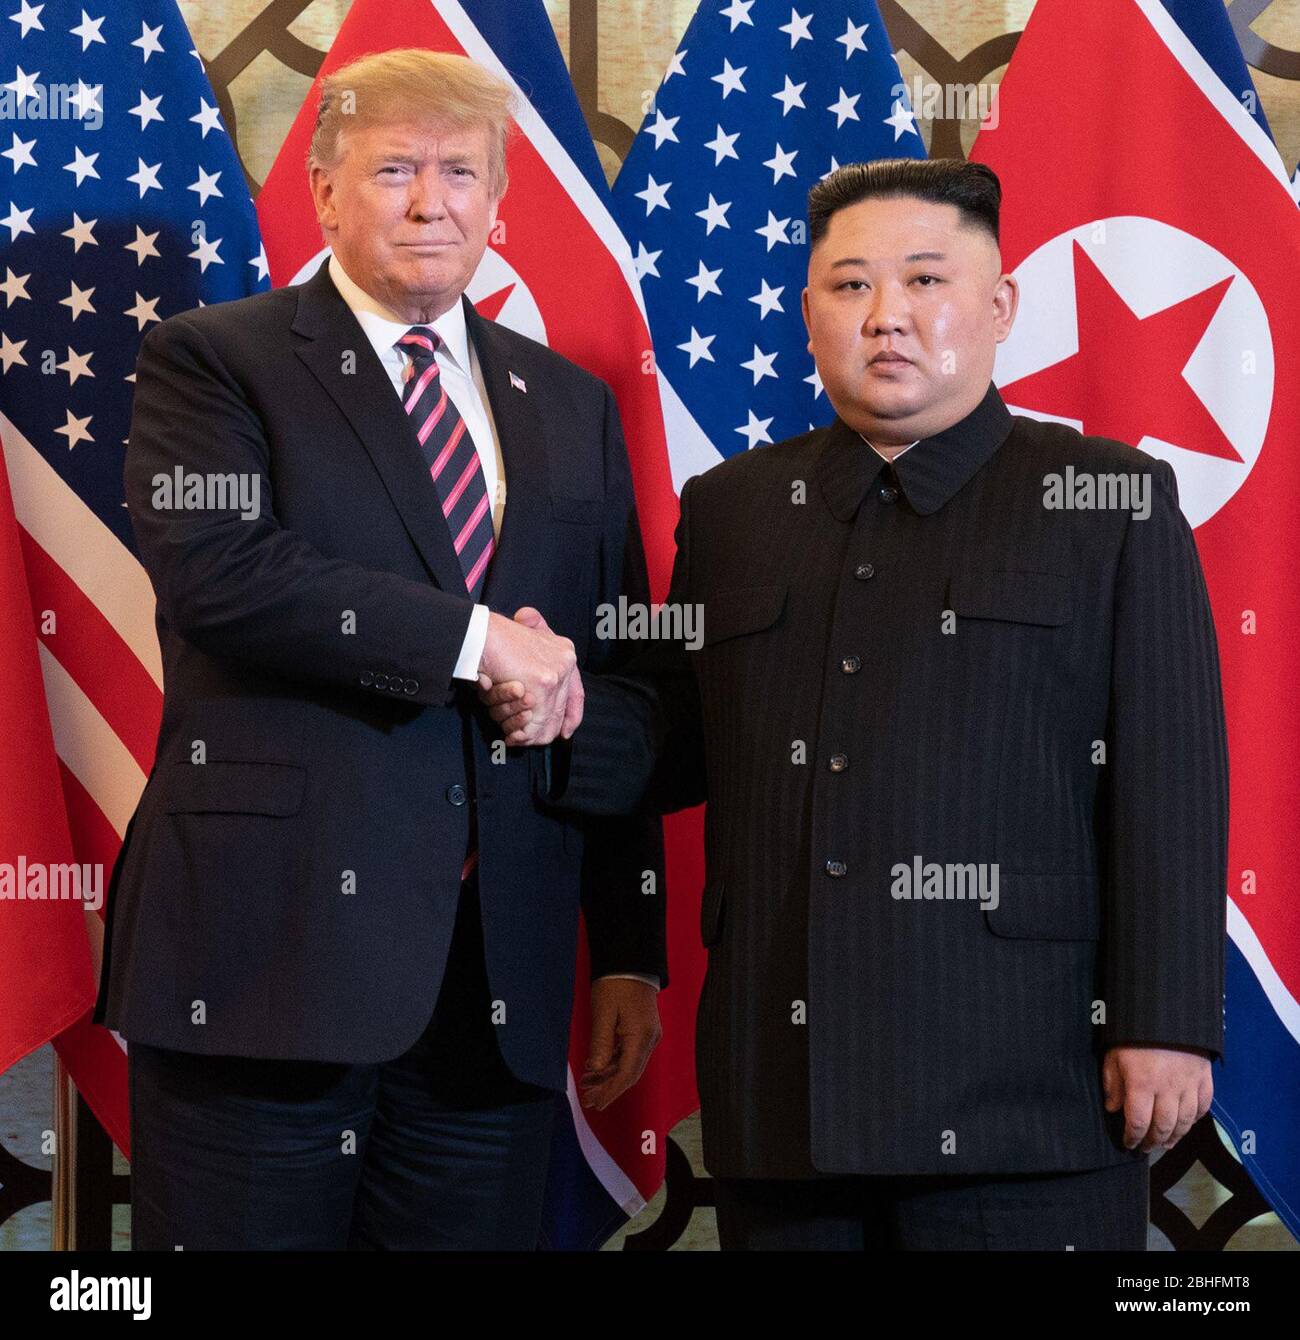 Hanoi, Vietnam. 27th Feb, 2019. President Donald J. Trump is greeted by Kim Jong Un, Chairman of the State Affairs Commission of the Democratic People's Republic of Korea, Wednesday, Feb. 27, 2019, at the Sofitel Legend Metropole hotel in Hanoi, for their second summit. People: President Donald Trump, Kim Jong Un Credit: Storms Media Group/Alamy Live News Stock Photo